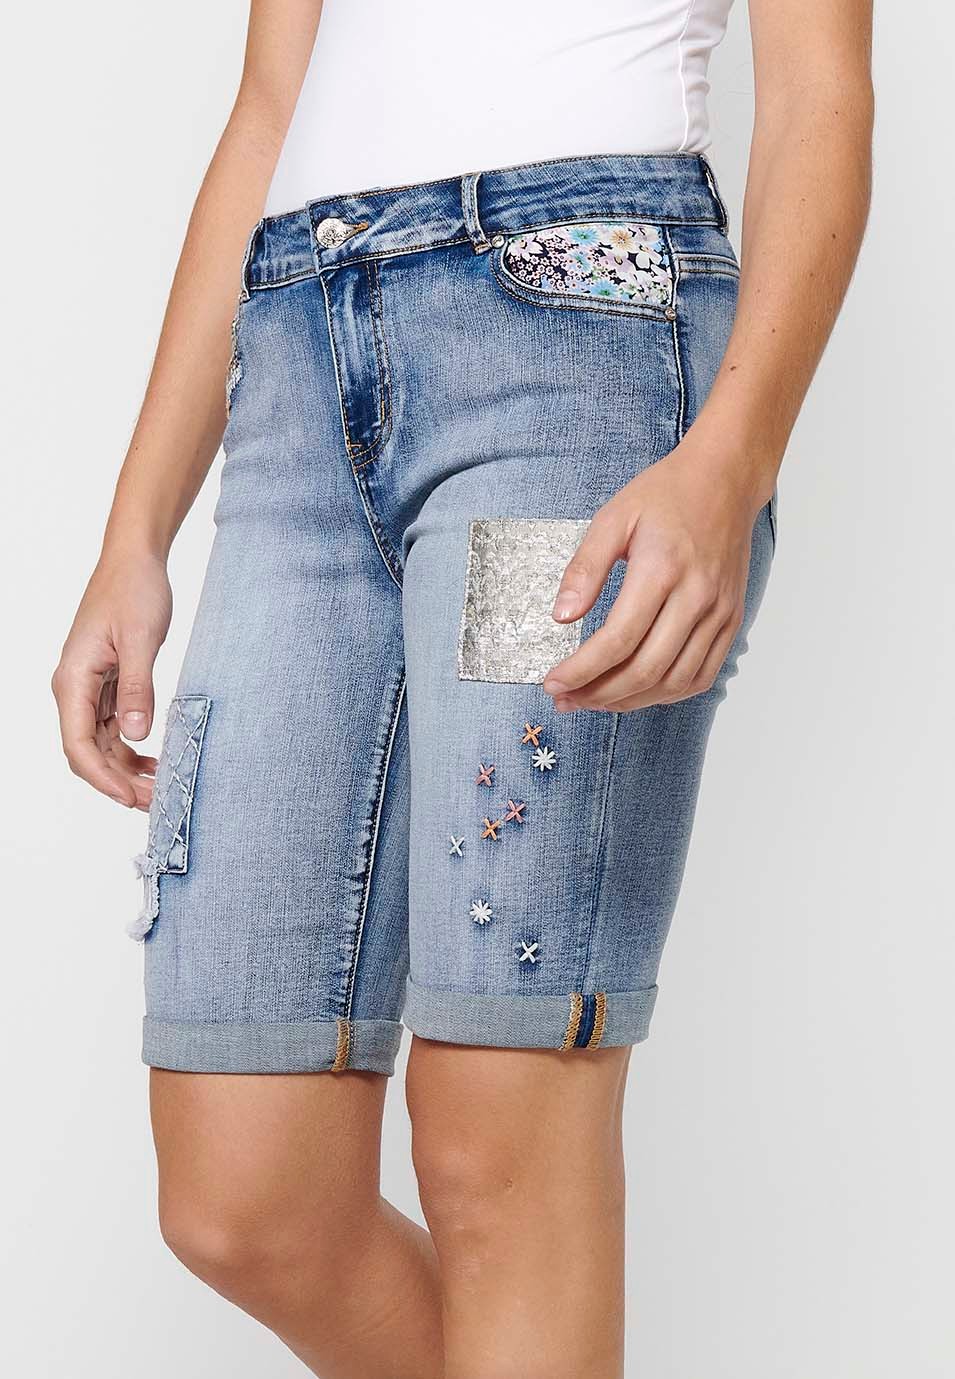 Short shorts finished in turn with details of front patches and removable chain decoration with front closure with zipper and button in Blue for Women 3